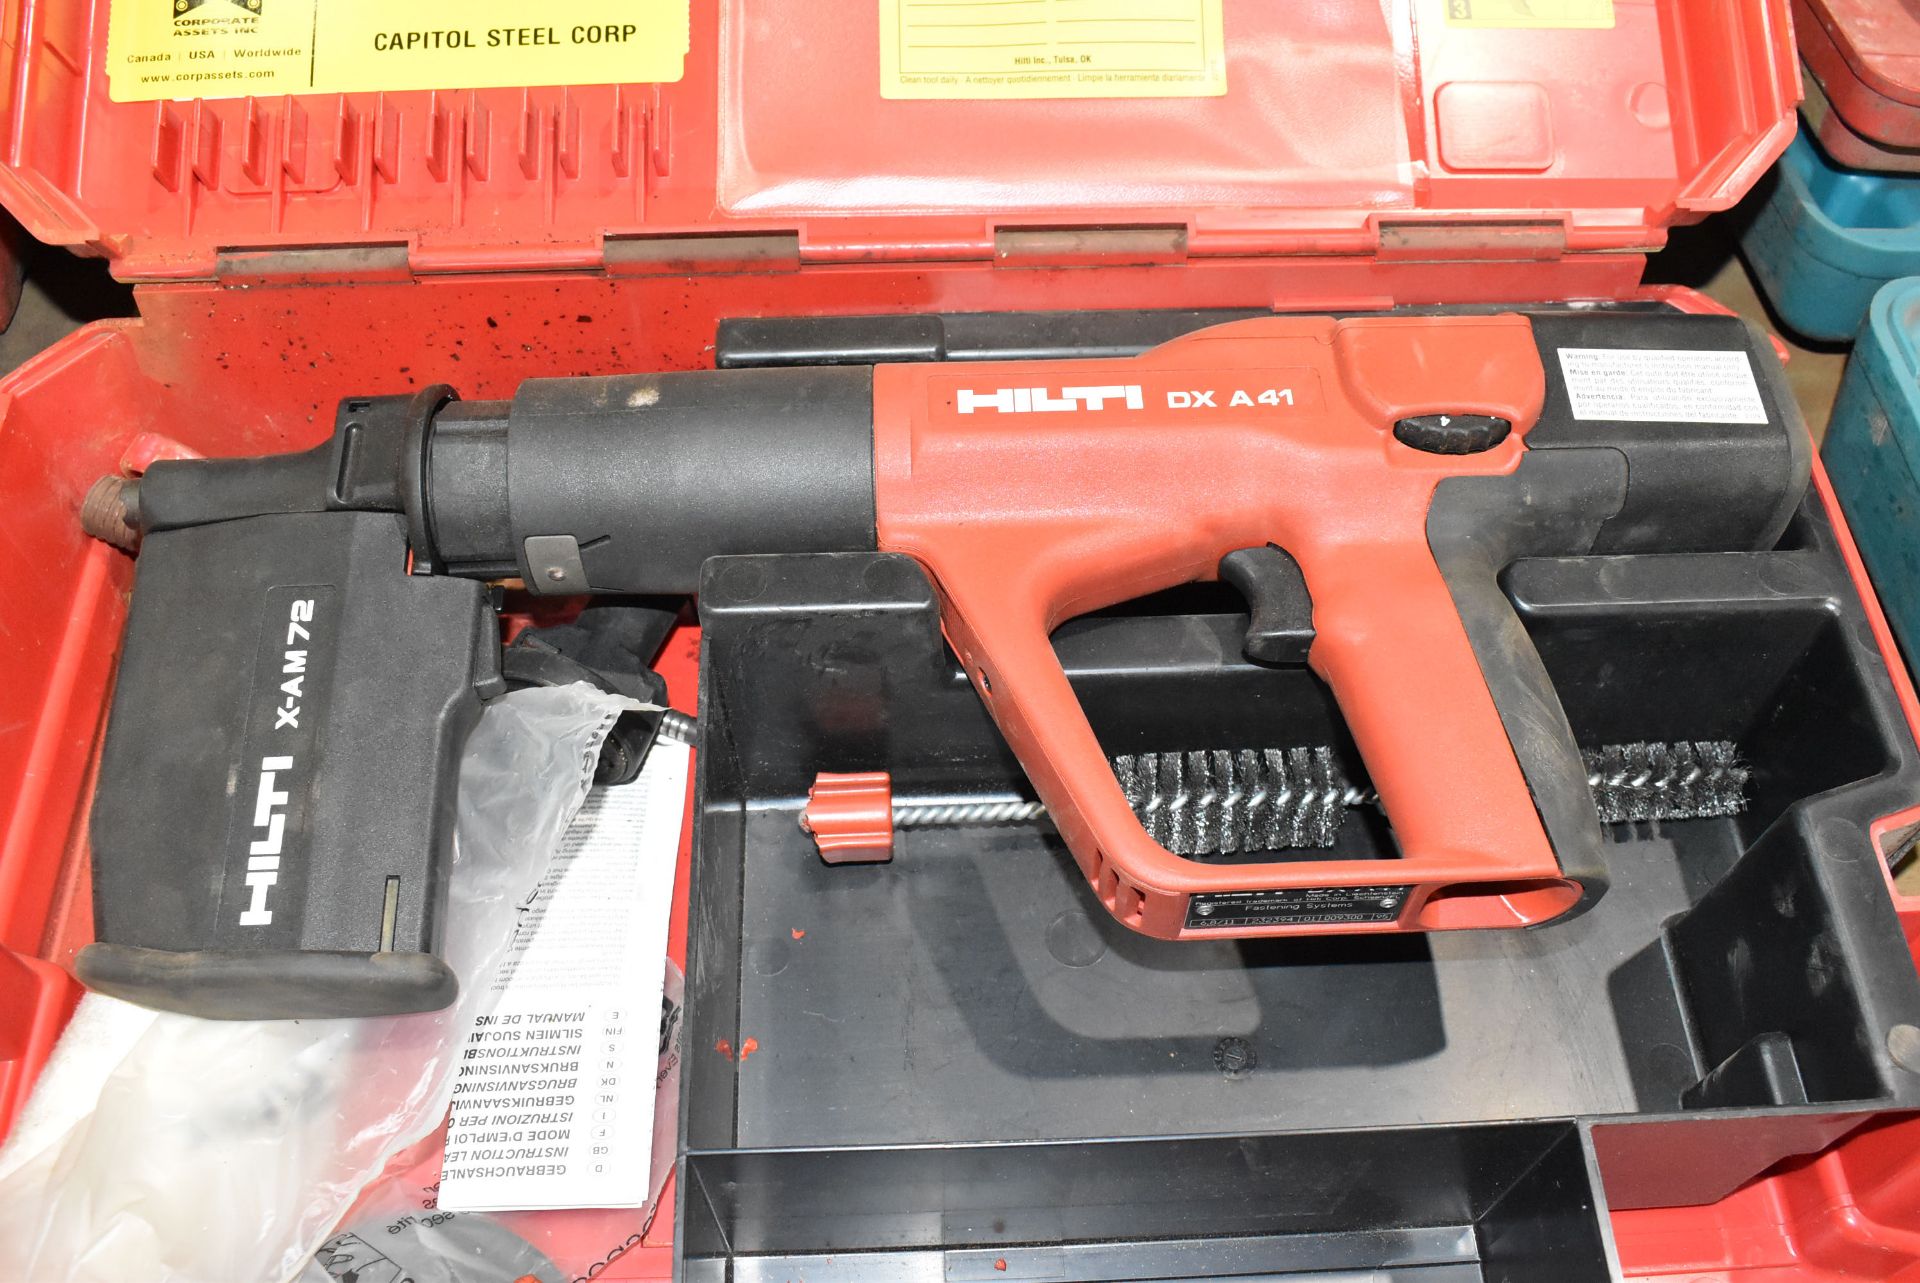 HILTI DX A41 FULLY AUTOMATIC POWER-ACTUATED FASTENING TOOL WITH HILTI X-AM72 NAIL MAGAZINE - Image 2 of 4